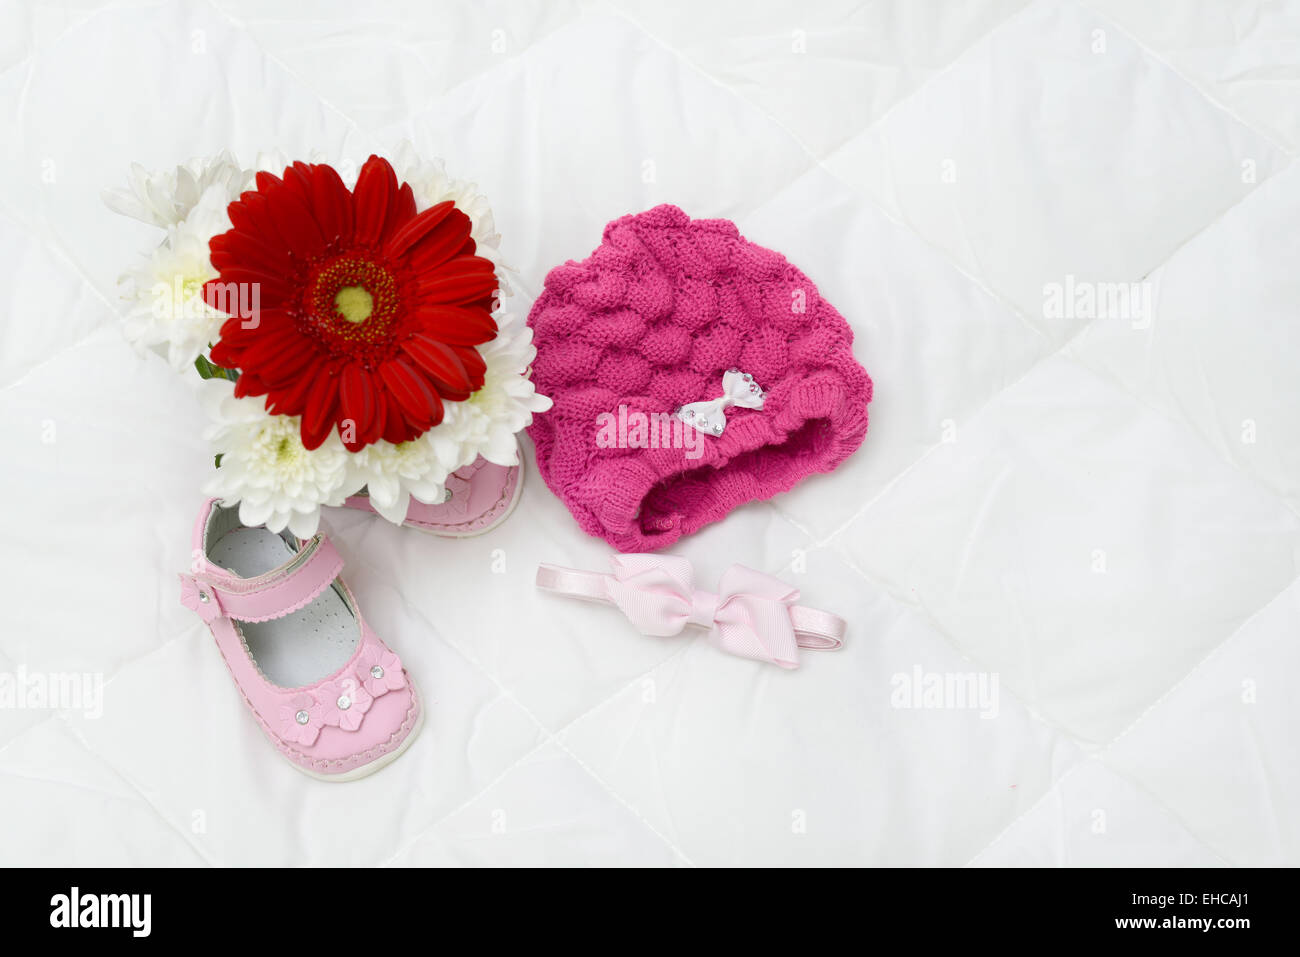 Gerbera pink baby shoes and headpiece pink in natural light Stock Photo